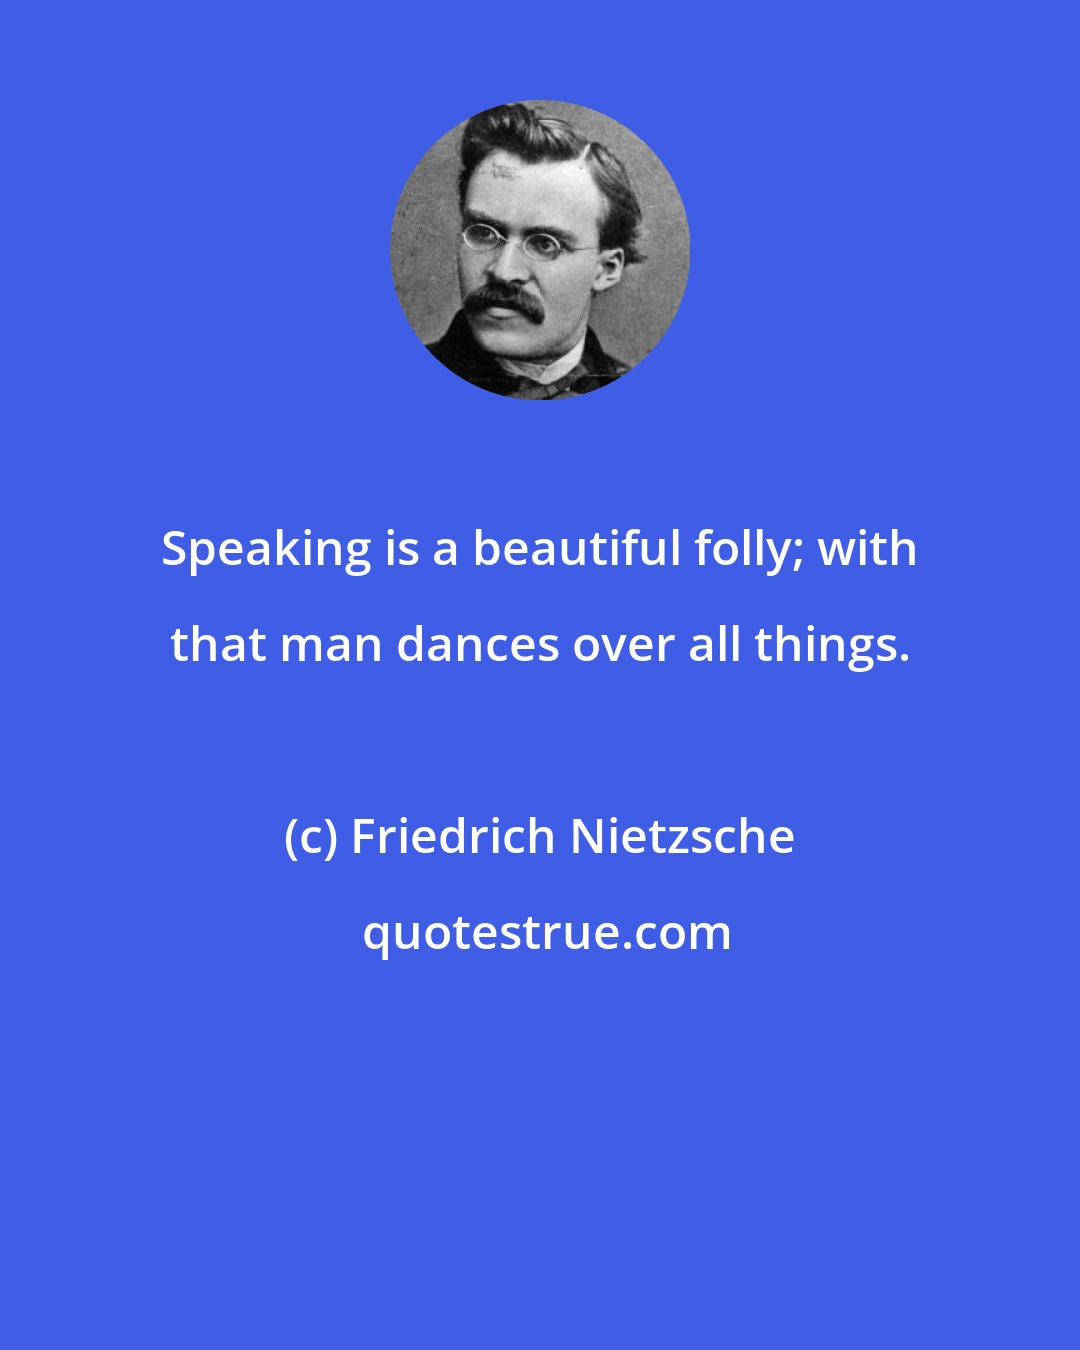 Friedrich Nietzsche: Speaking is a beautiful folly; with that man dances over all things.